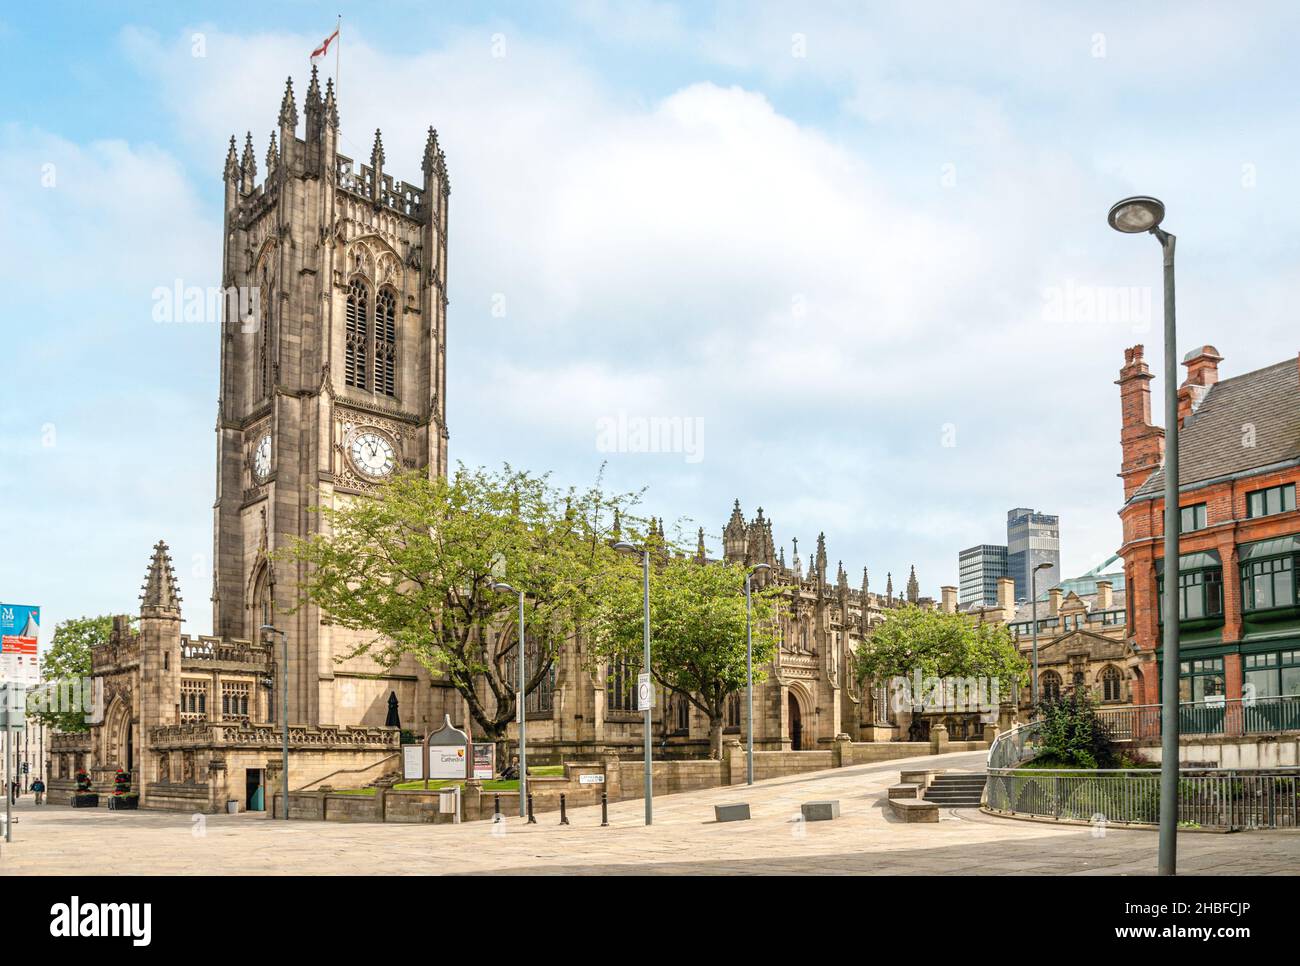 Manchester Cathedral is a Medieval church located on Victoria Street in central Manchester. Stock Photo